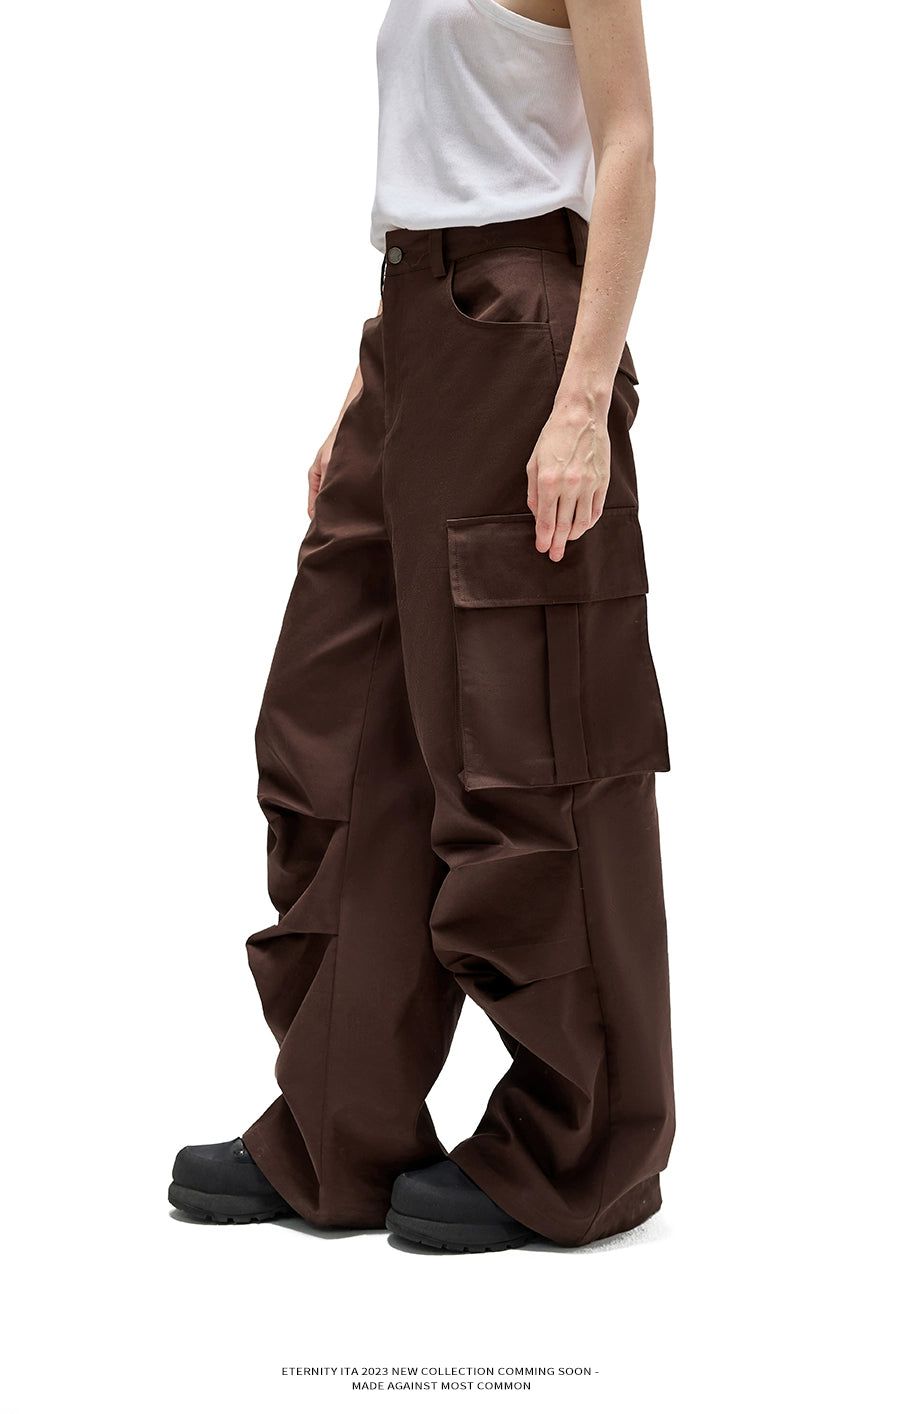 Solid Color Cargo Pants Korean Street Fashion Pants By ETERNITY ITA Shop Online at OH Vault